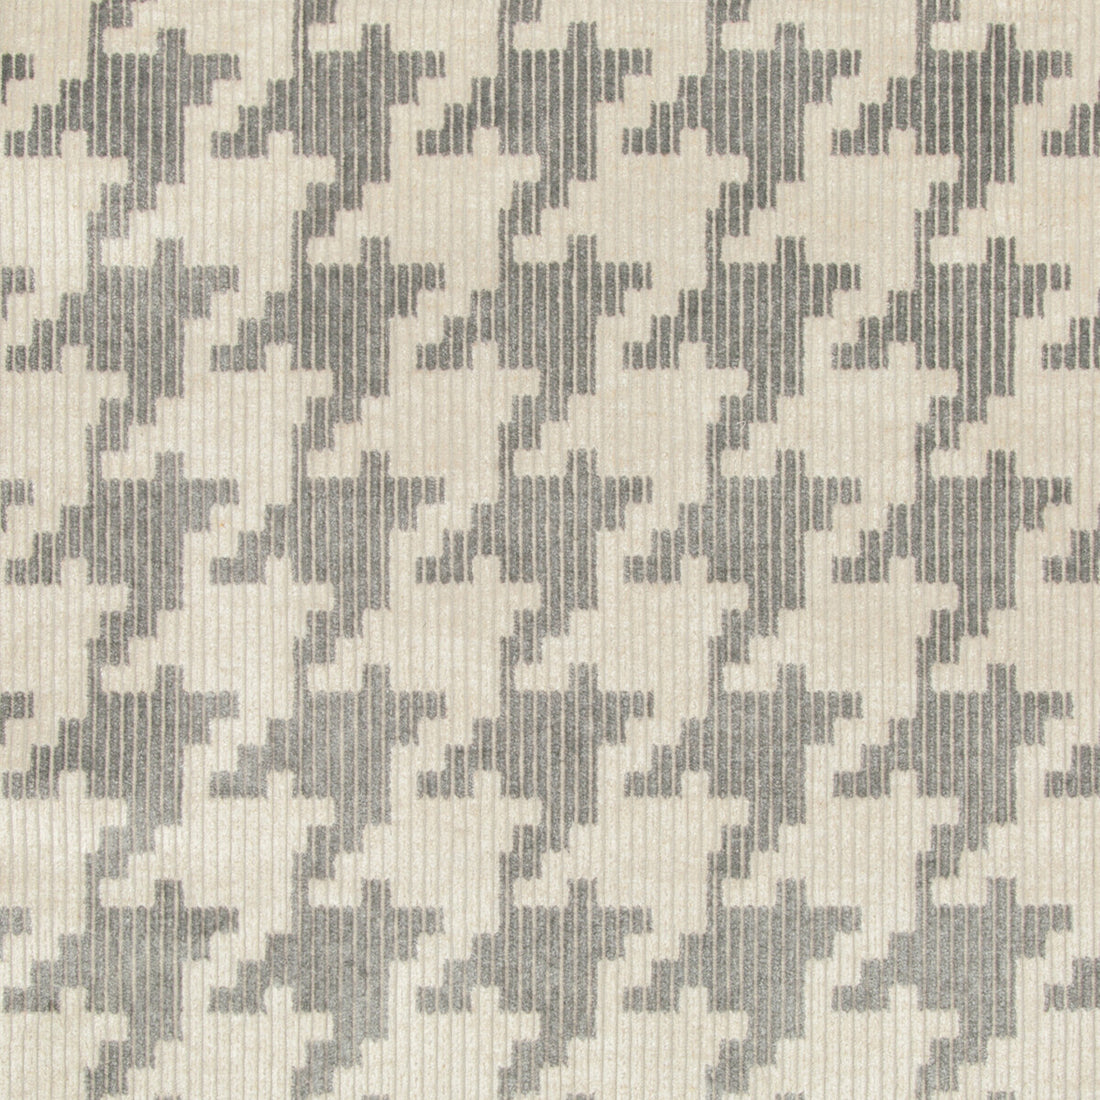 Spectator fabric in slate color - pattern 34924.11.0 - by Kravet Couture in the Modern Tailor collection